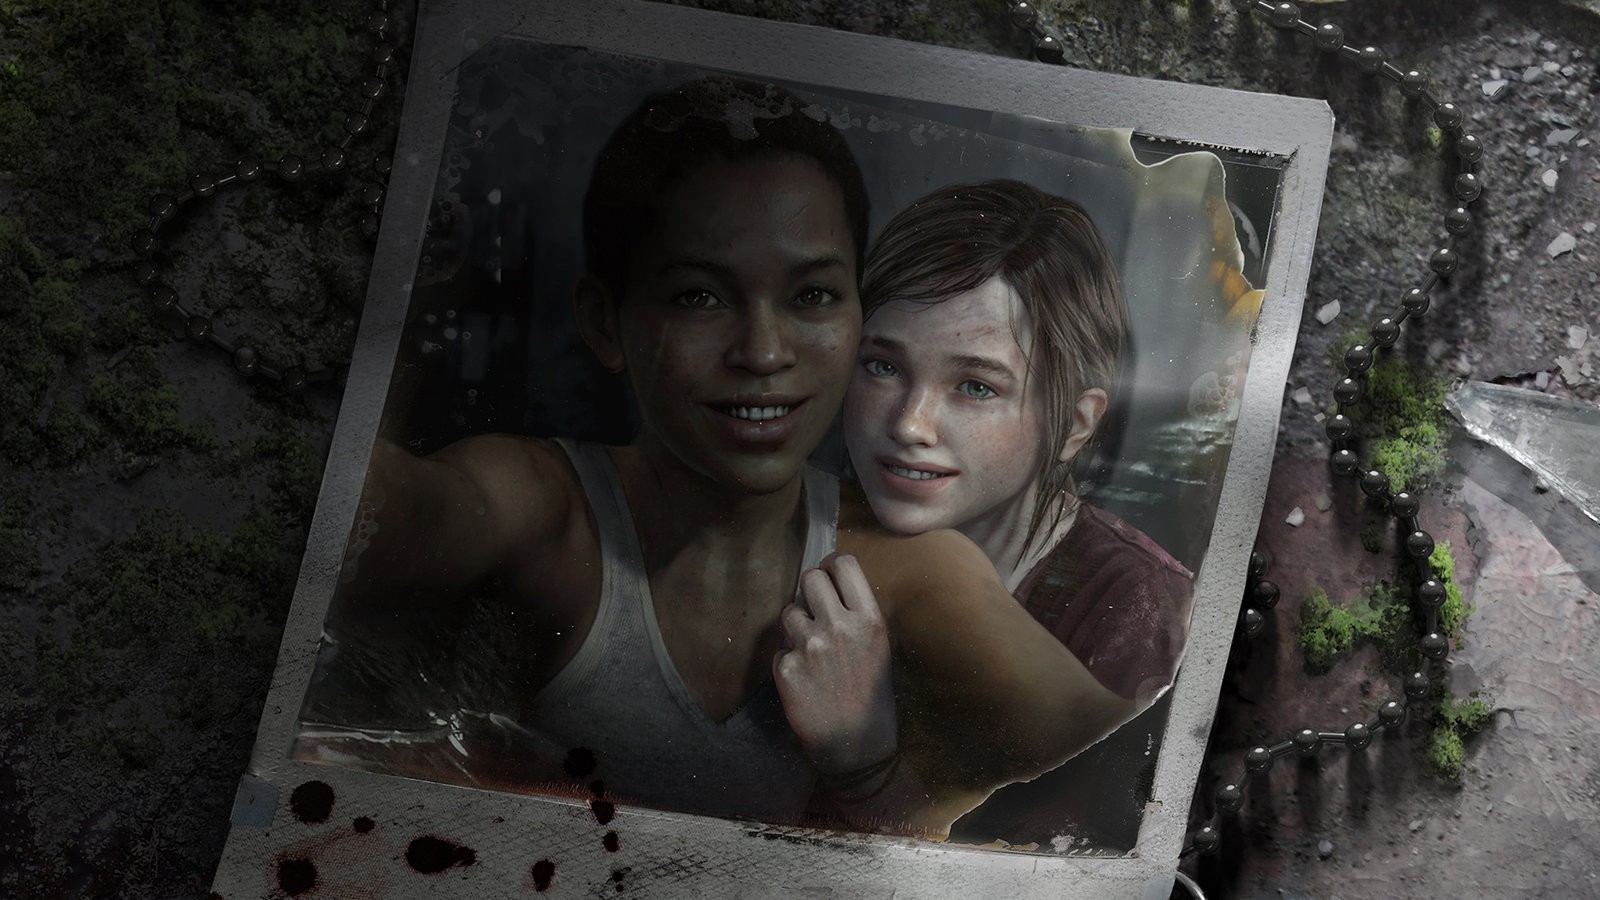 General 1600x900 video games polaroid The Last of Us Naughty Dog Ellie Williams video game characters